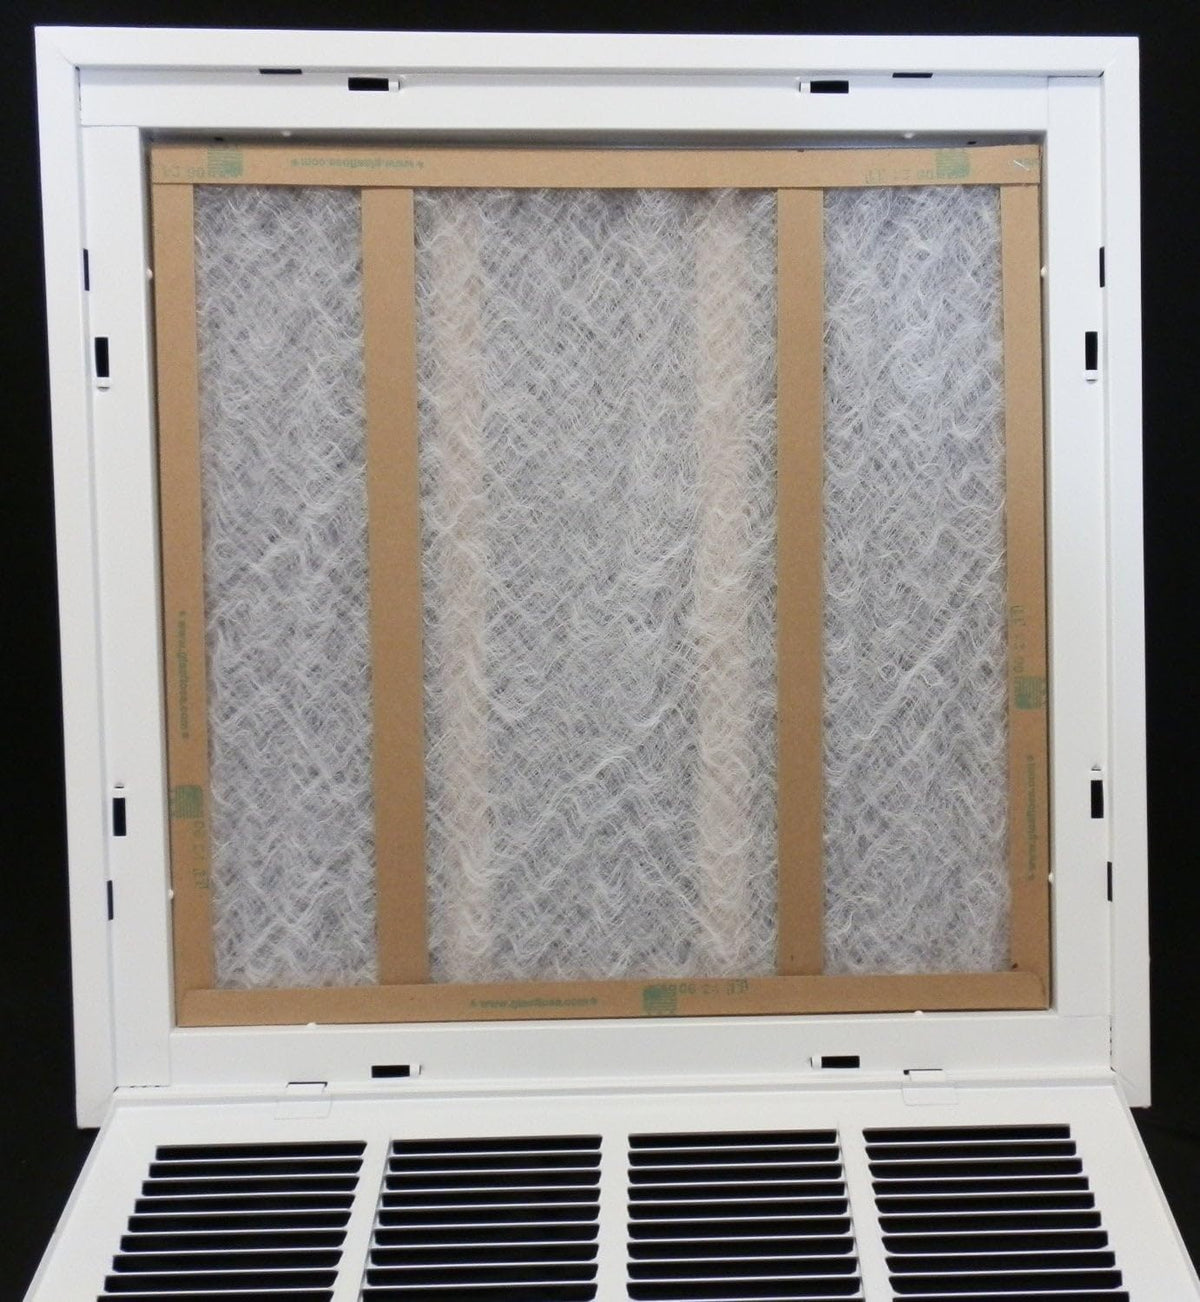 32&quot; X 18&quot; Steel Return Air Filter Grille for 1&quot; Filter - Removable Frame - [Outer Dimensions: 34 5/8&quot; X 20 5/8&quot;]